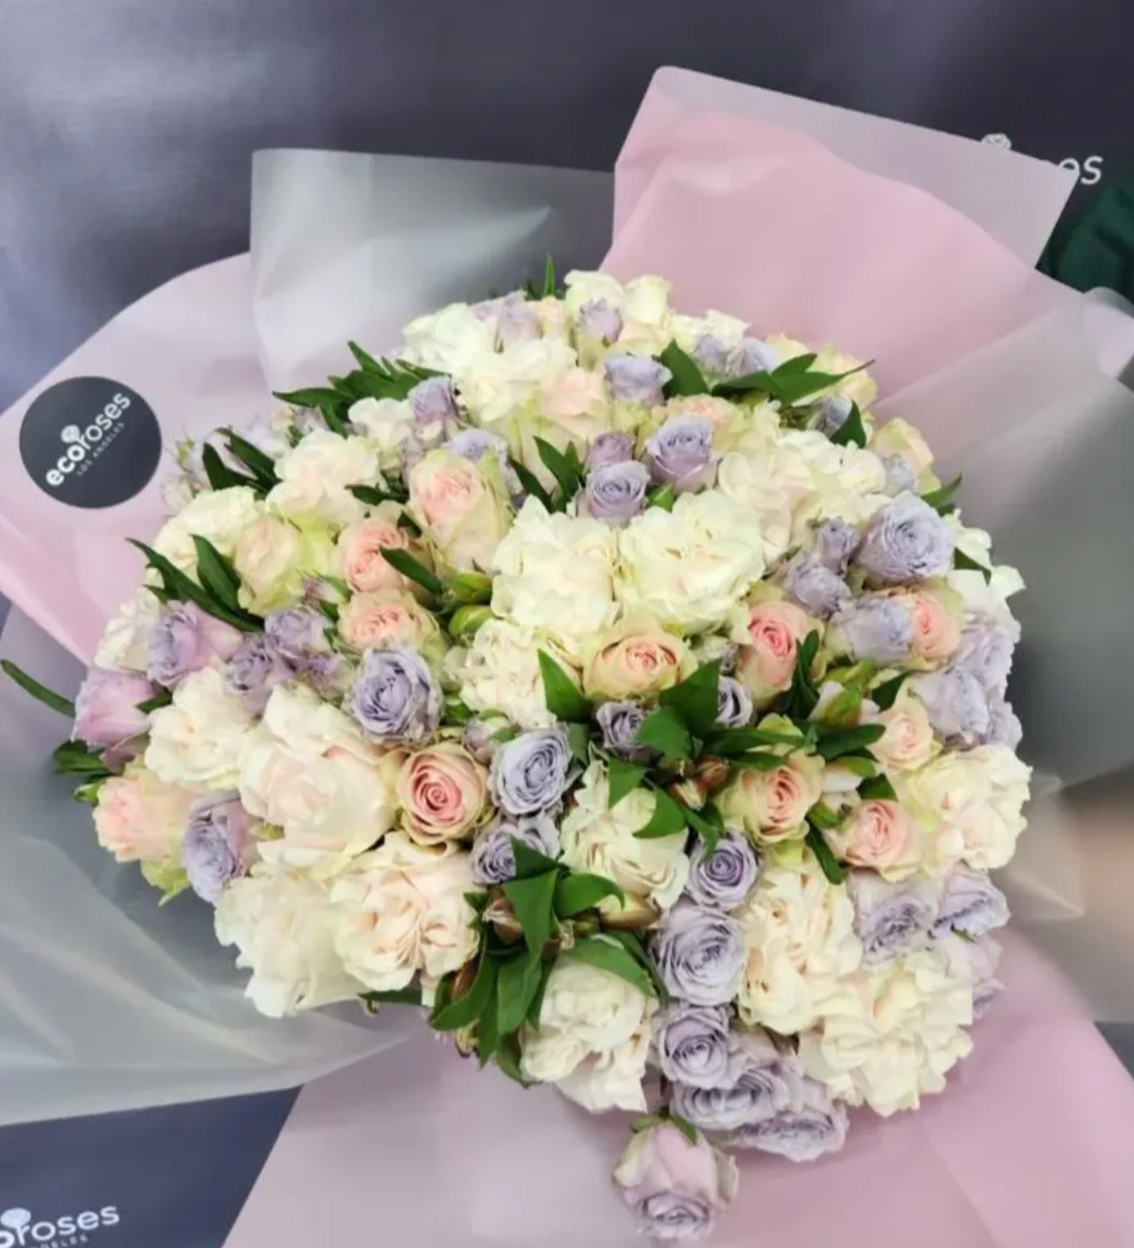 Lavender And Ivory Dreams bouquet features a beautiful combination of lavender and ivory blooms